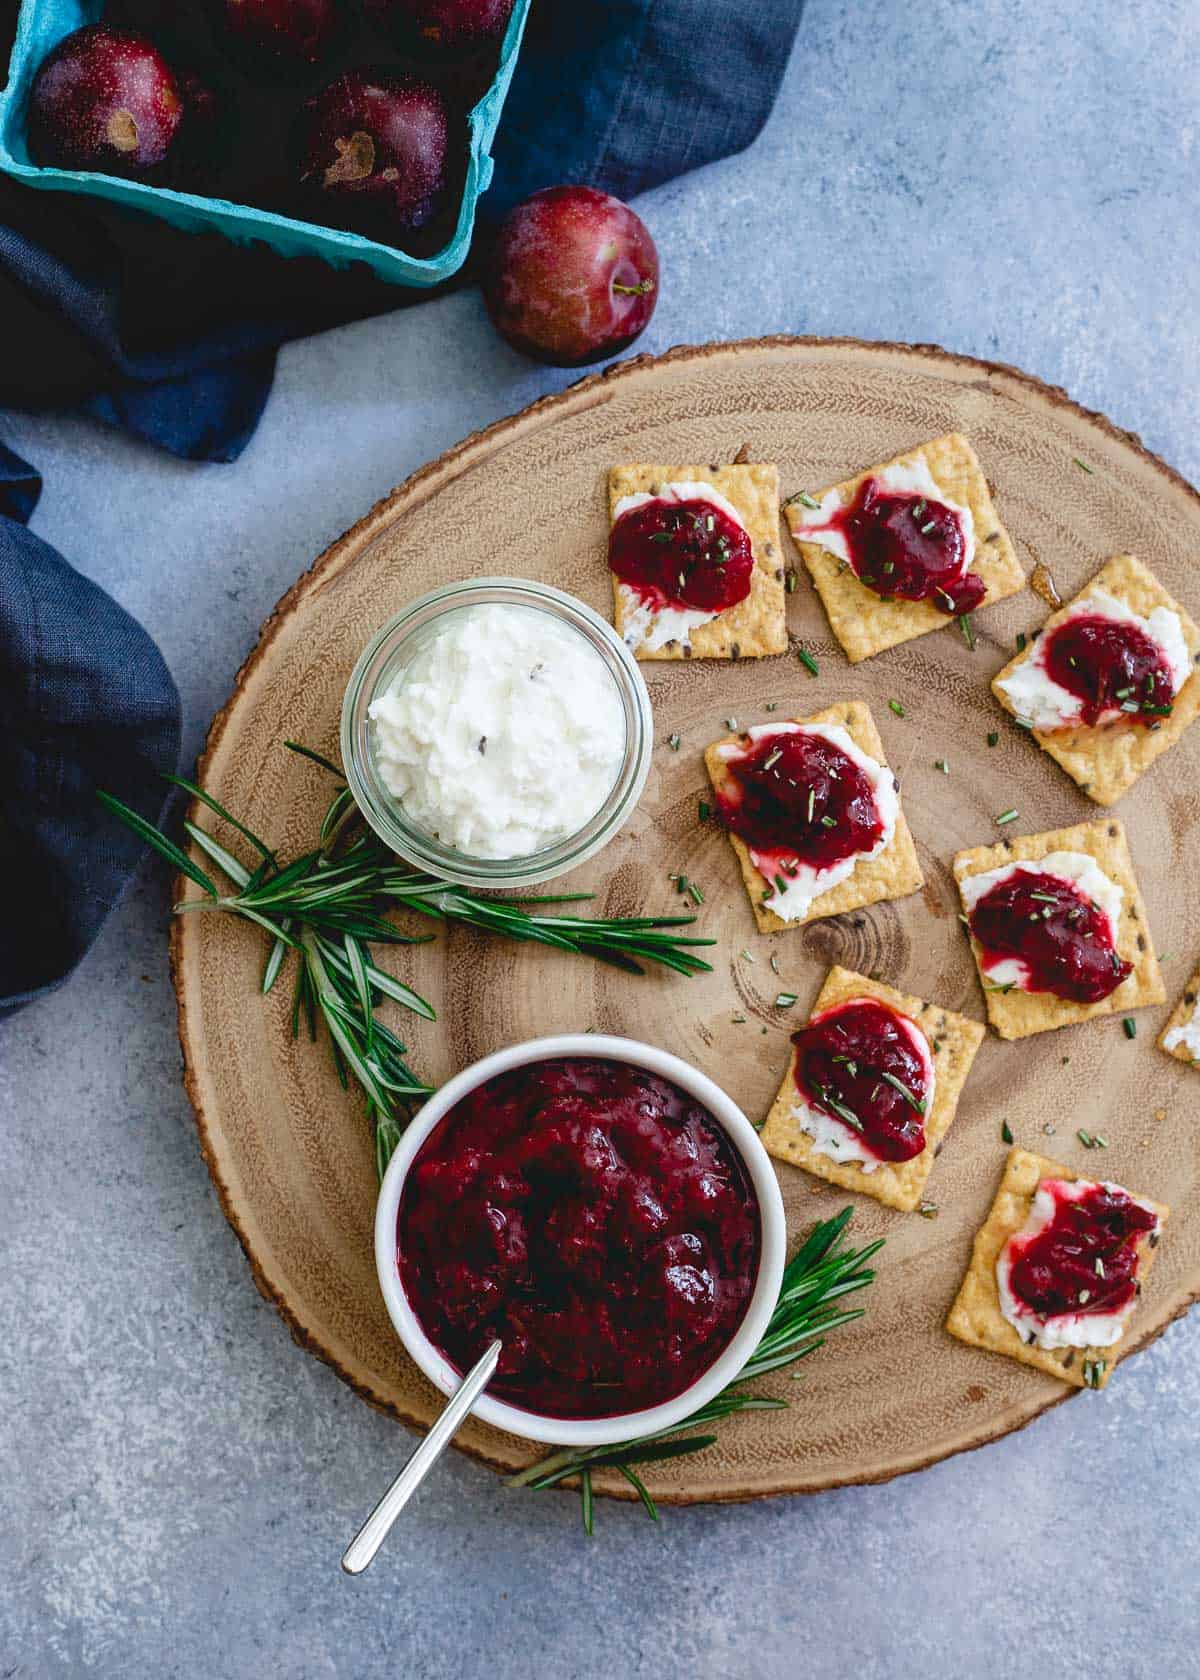 Make your own plum jam with sweet summer plums, Chinese five spice and a bit of rosemary for a delicious summer snack on crackers.